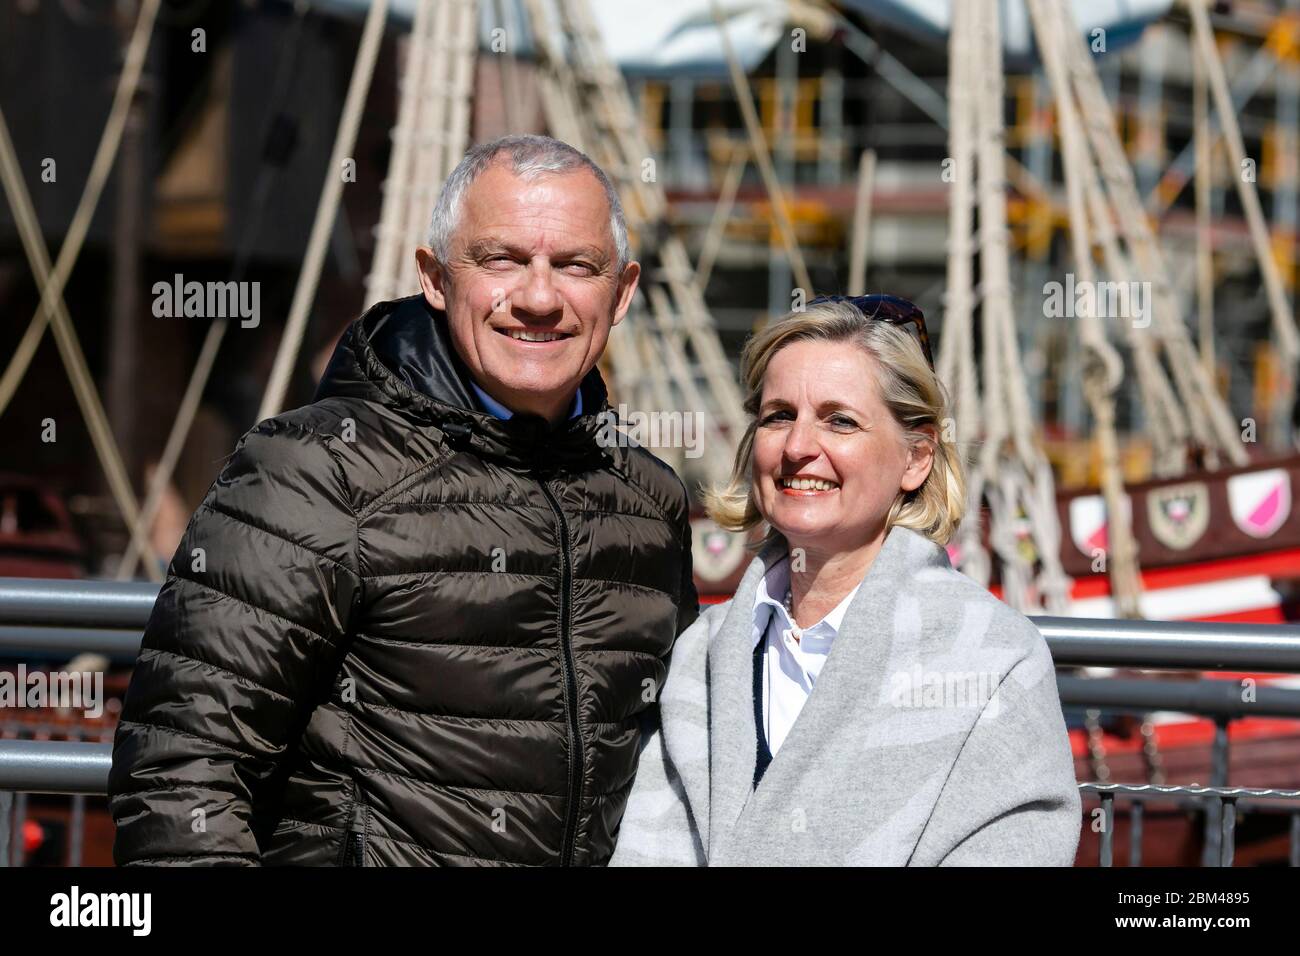 20 April 2020, Schleswig-Holstein, Sierksdorf: Christoph (l) and Claudia Leicht, Managing Director of Hansa-Park in Sierksdorf, look into the camera. The planned opening of the amusement area in the district of Ostholstein on 28 March 2020 has been postponed indefinitely due to the Corona crisis. Opened in 1977, the Hansa-Park offers various theme areas with integrated shows and rides with a view of the Baltic Sea on an area of 460000 square metres. Until the end of the season in October, around 1.4 million visitors make their way to the park every year. (to dpa "Amusement parks in the north a Stock Photo